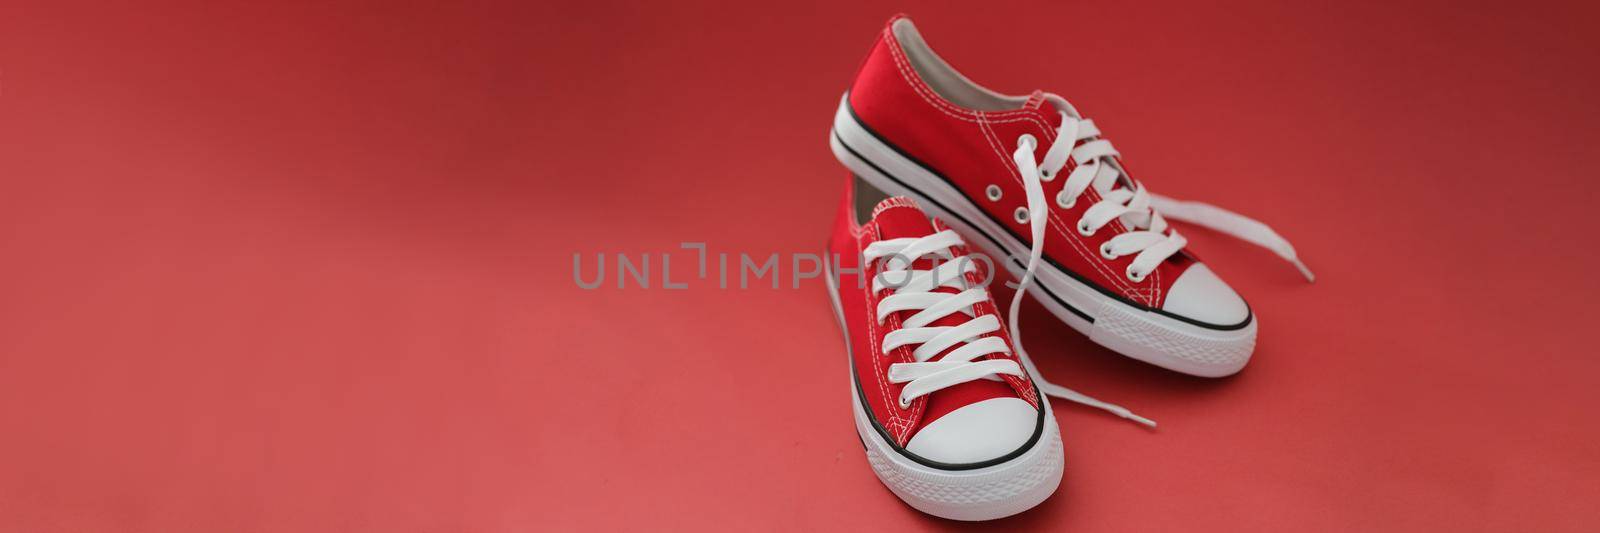 Pair of modern stylish red sneaker shoes, white and red colours mix, new collection by kuprevich